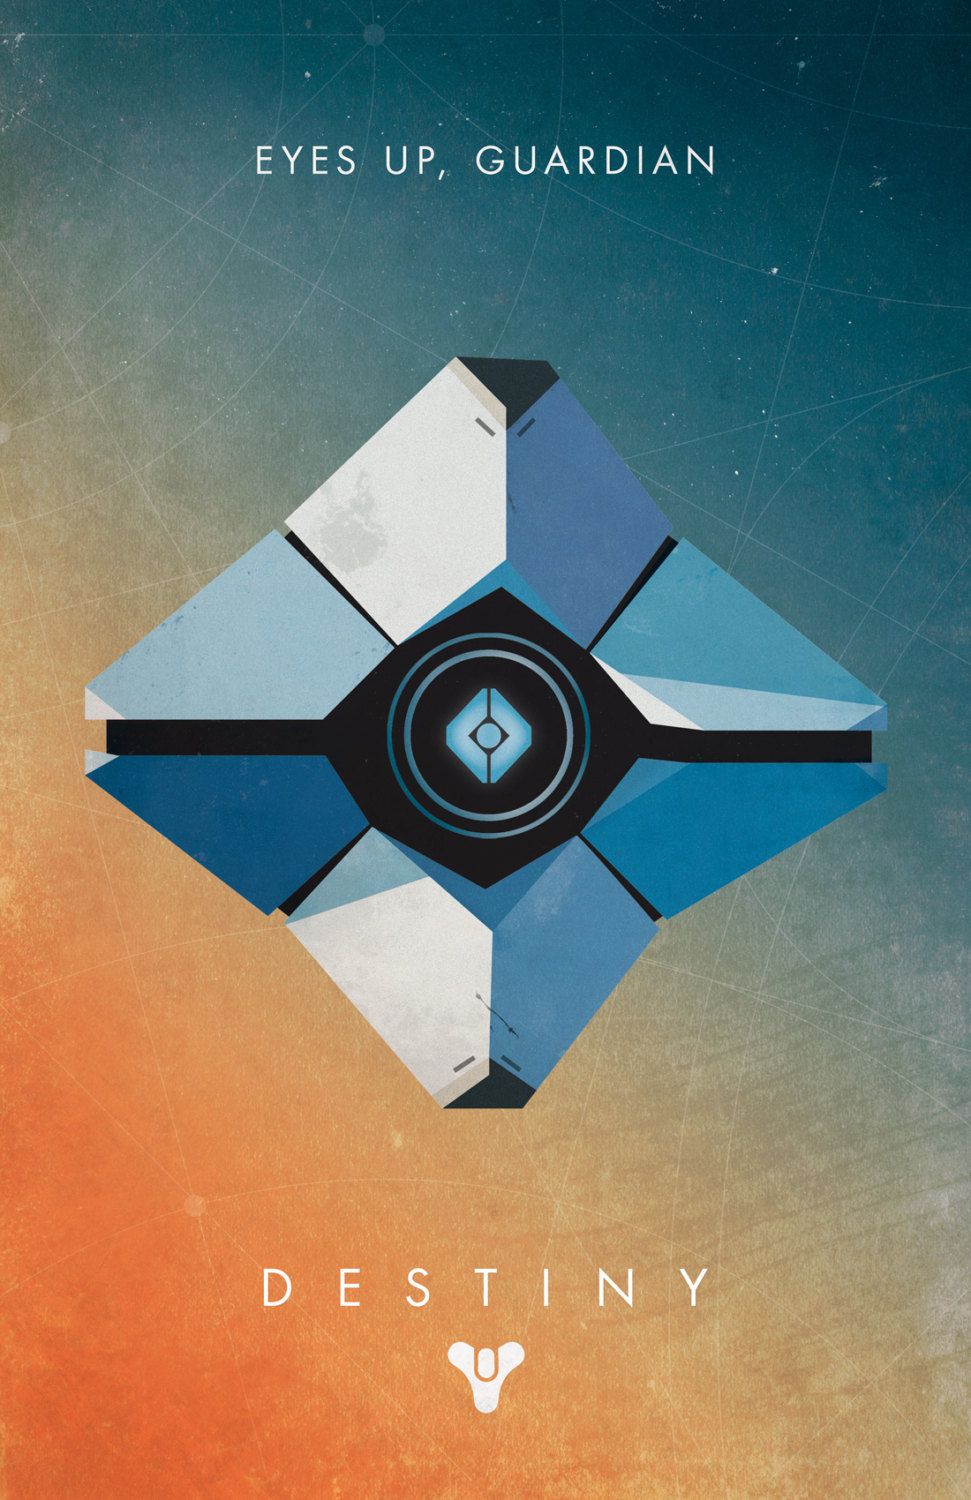 Destiny Ghost iPhone Wallpaper Free Destiny Ghost iPhone